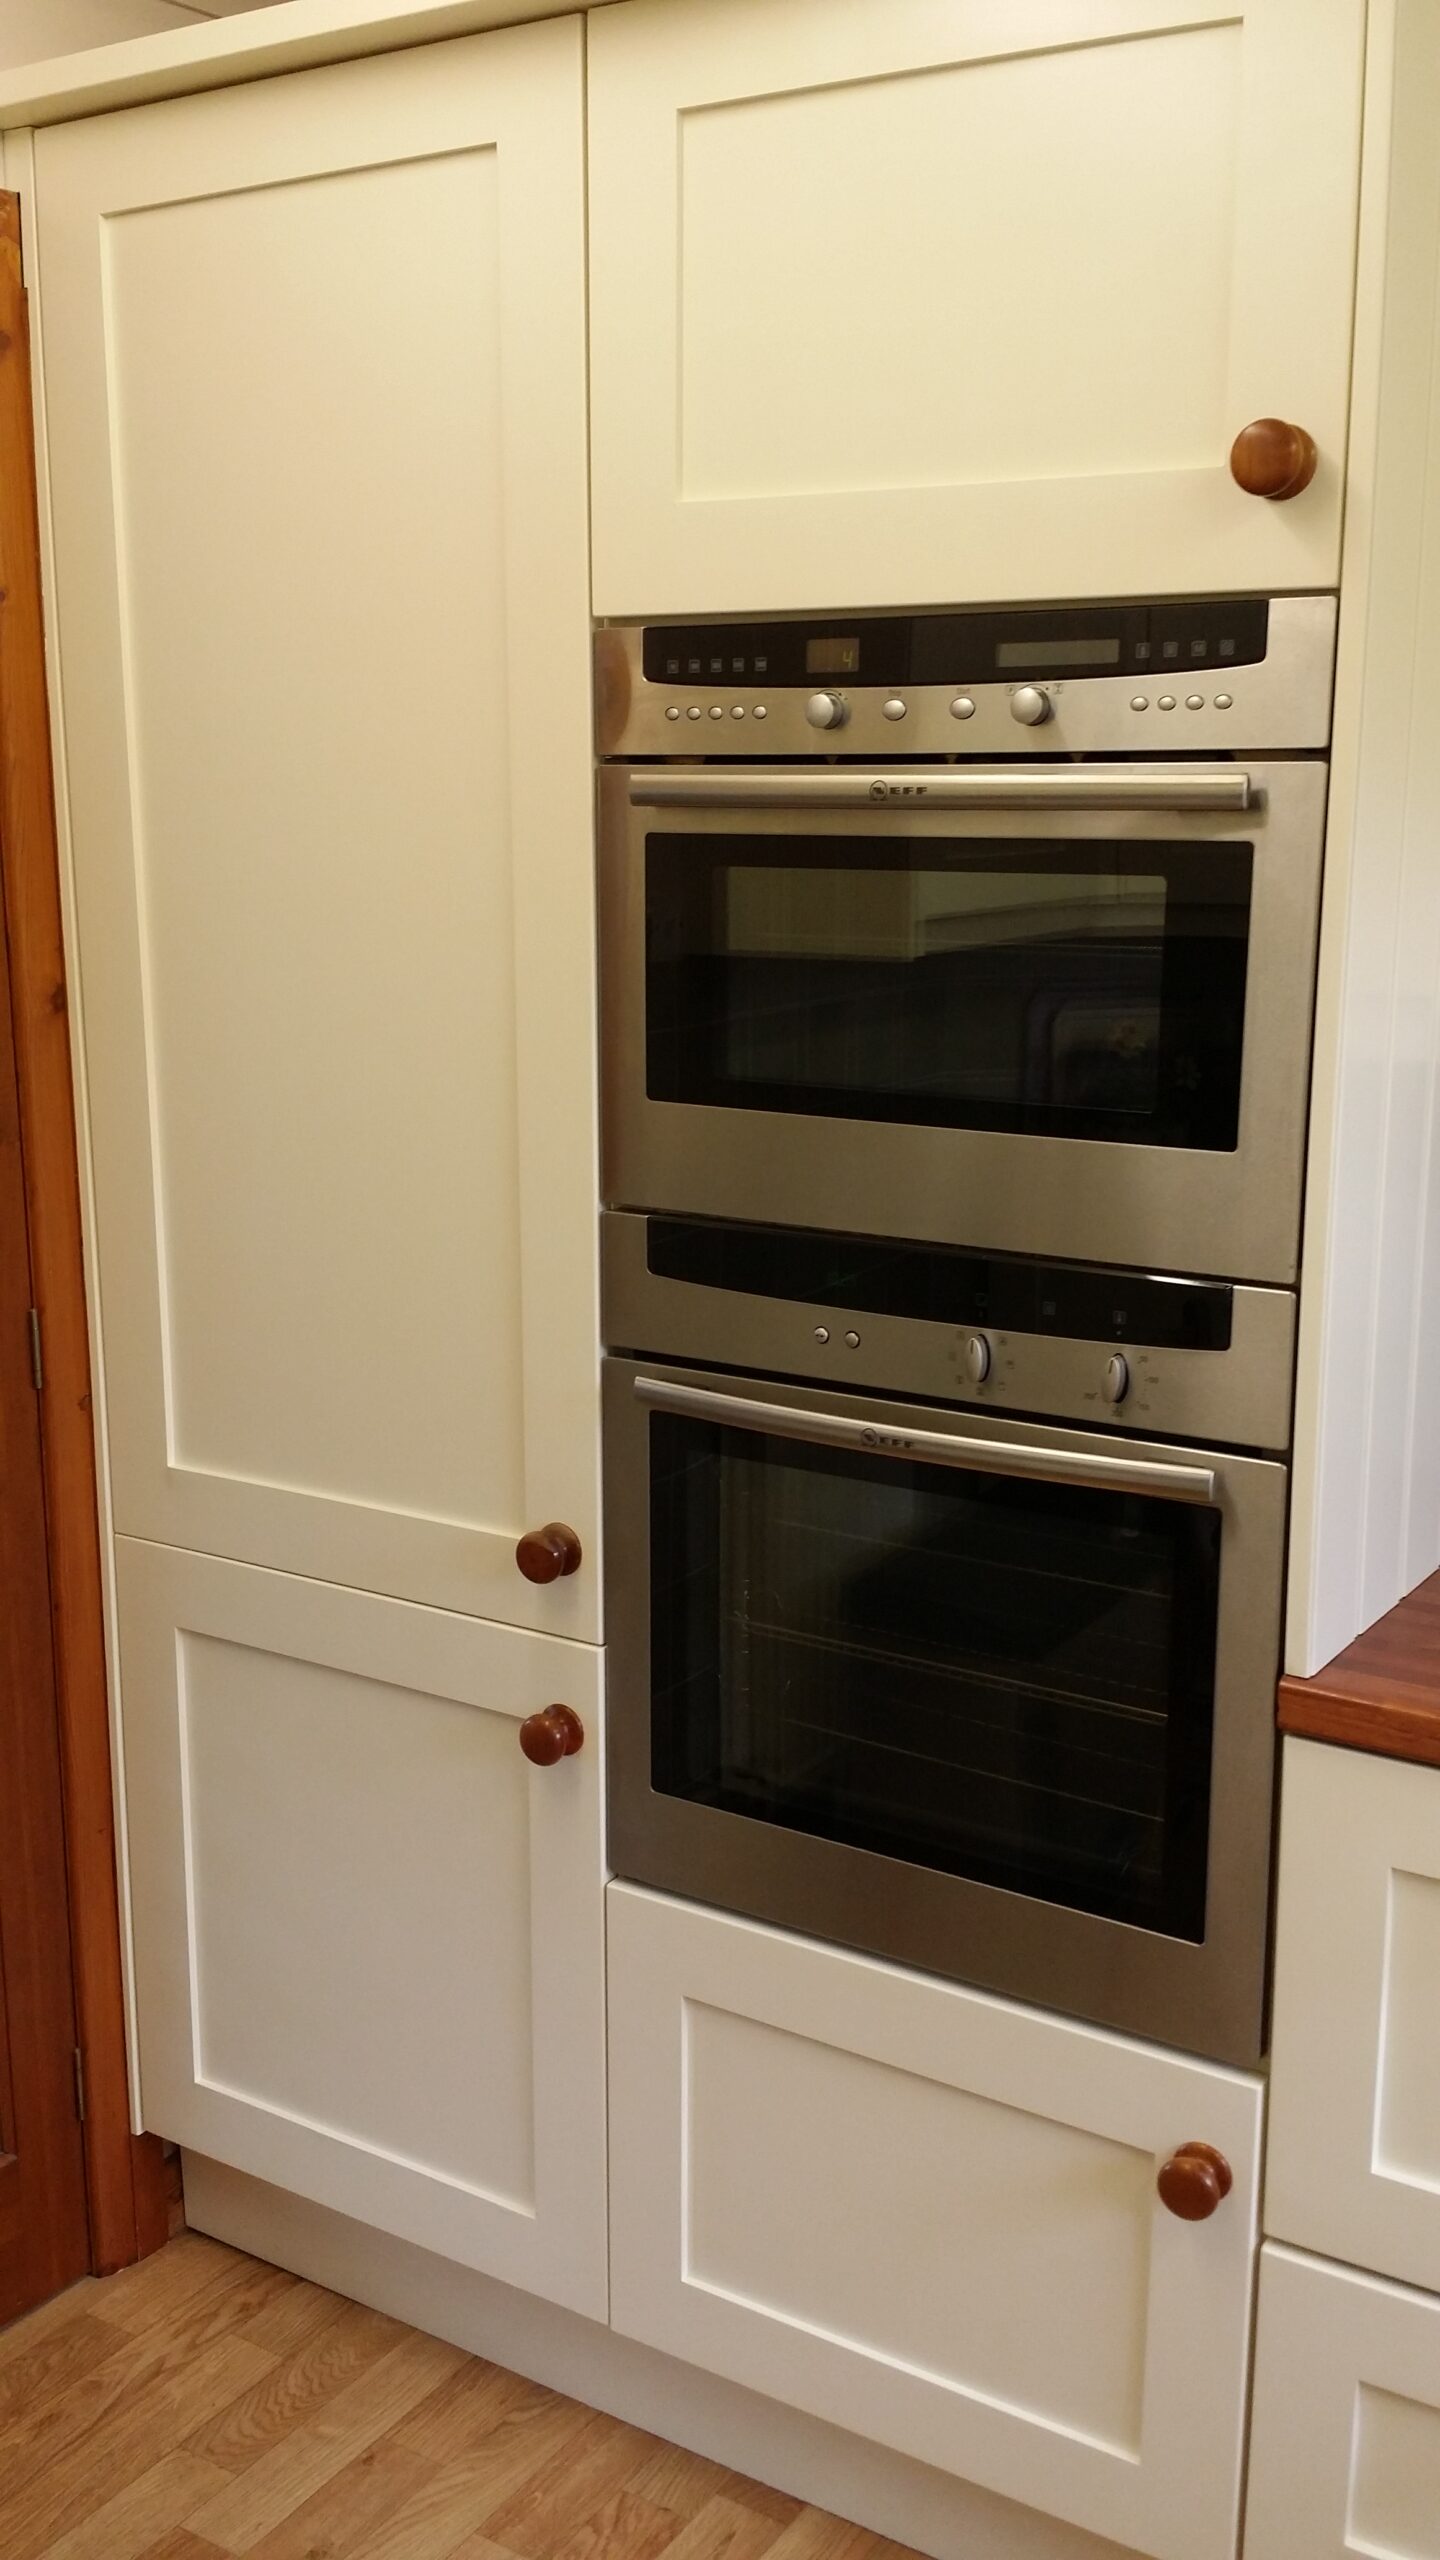 Farrow and Ball Cream Kitchen with Oven Housing